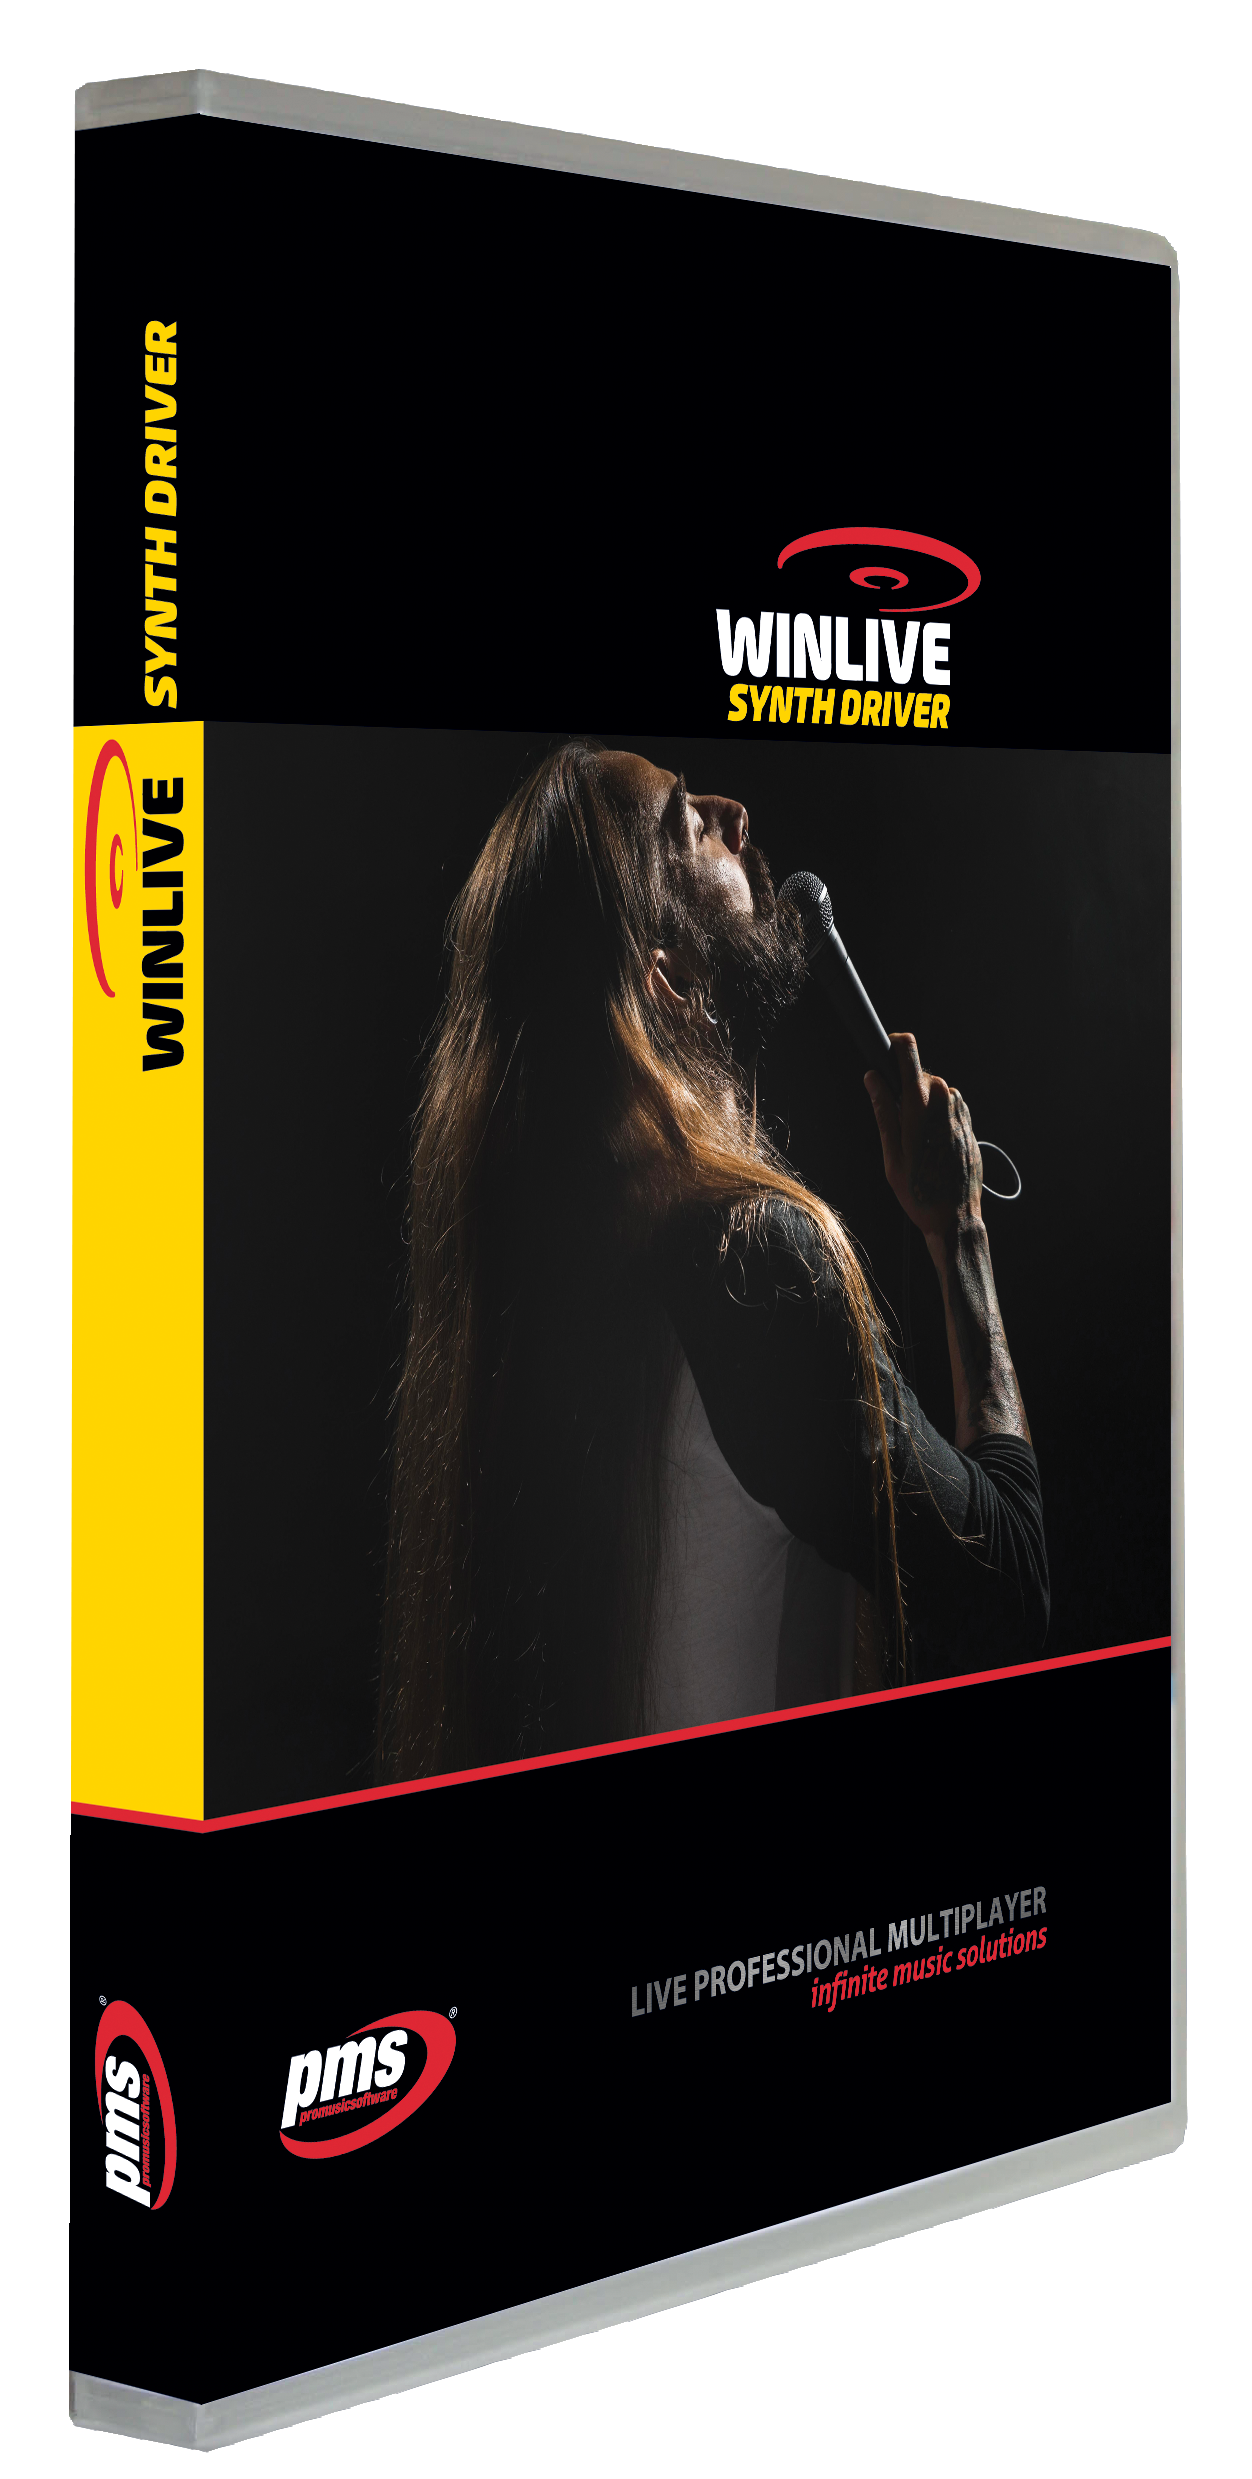 Winlive Synth Driver WSD 4